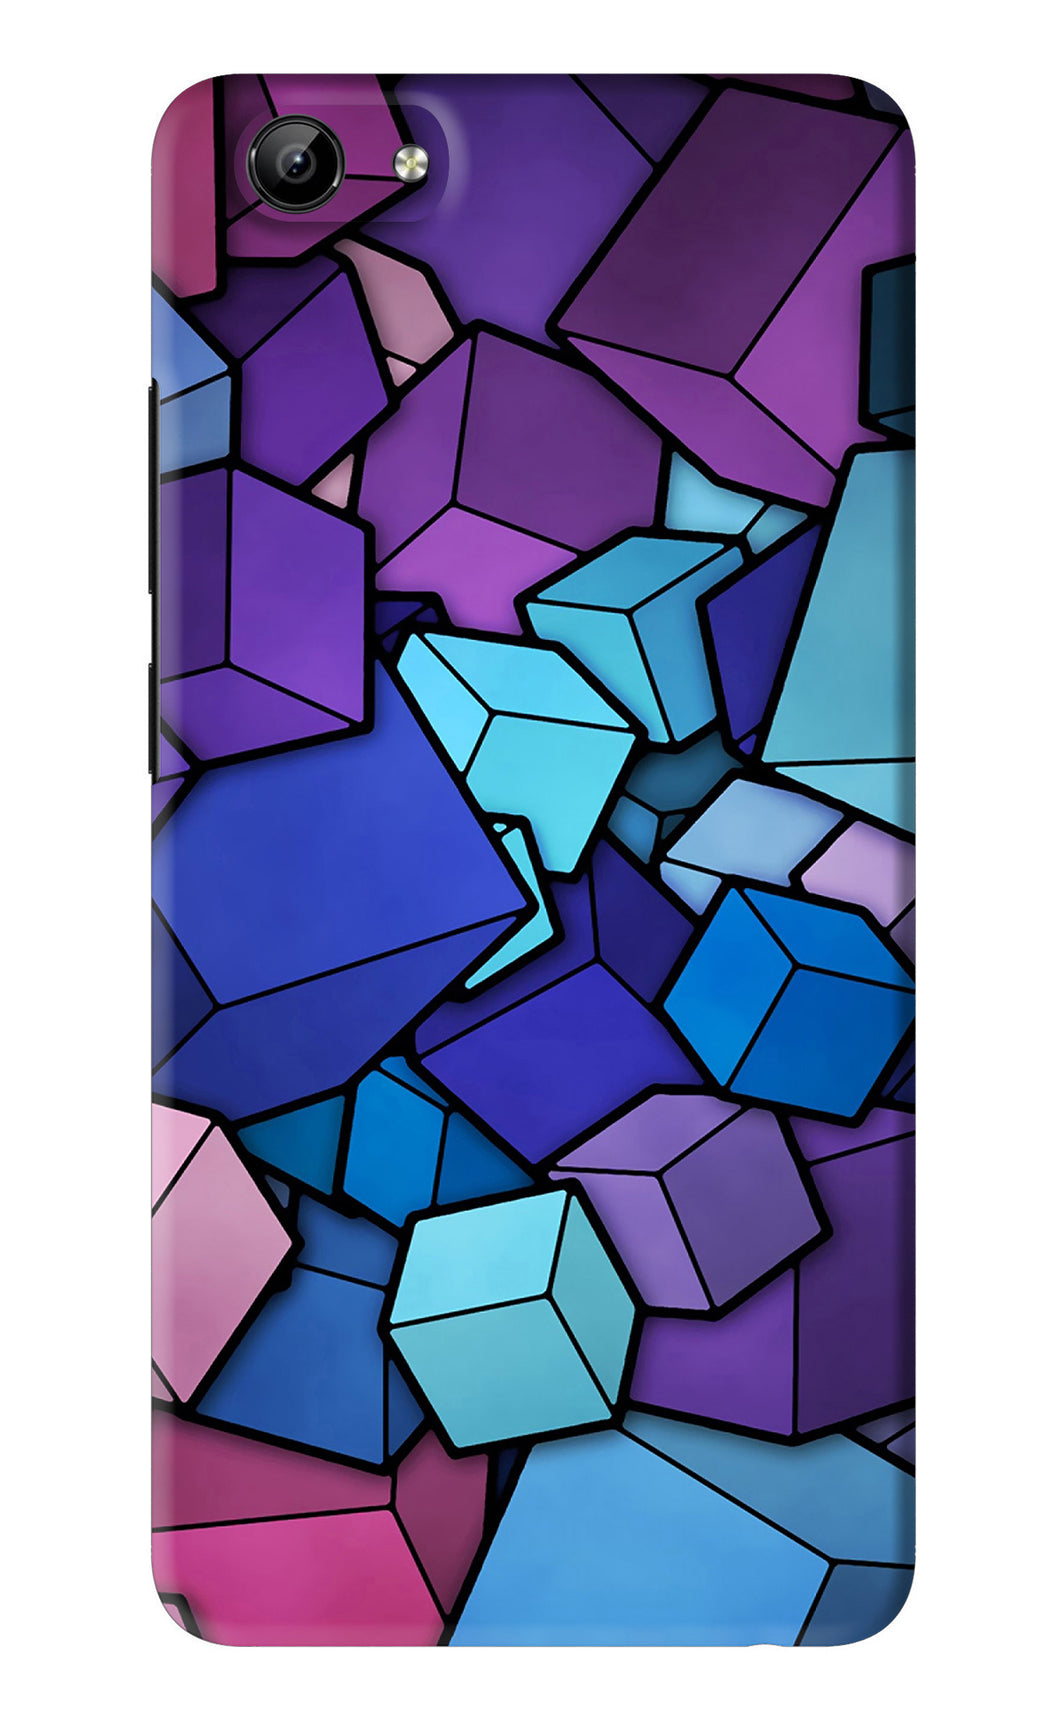 Cubic Abstract Vivo Y71 Back Skin Wrap